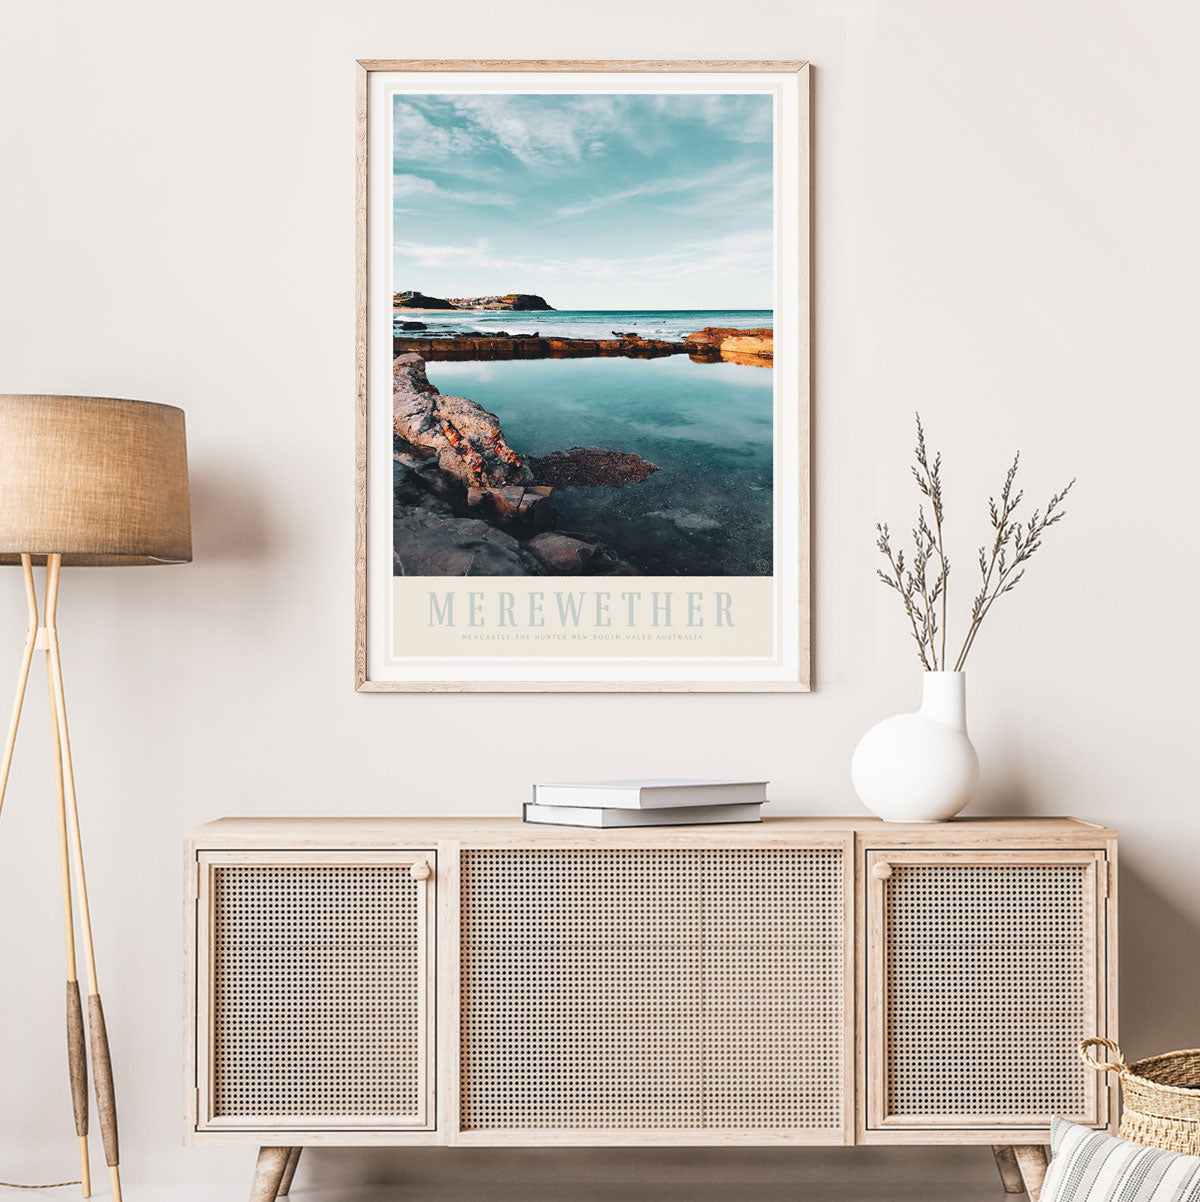 Merewether Beach vintage retro travel poster from Places We Luv